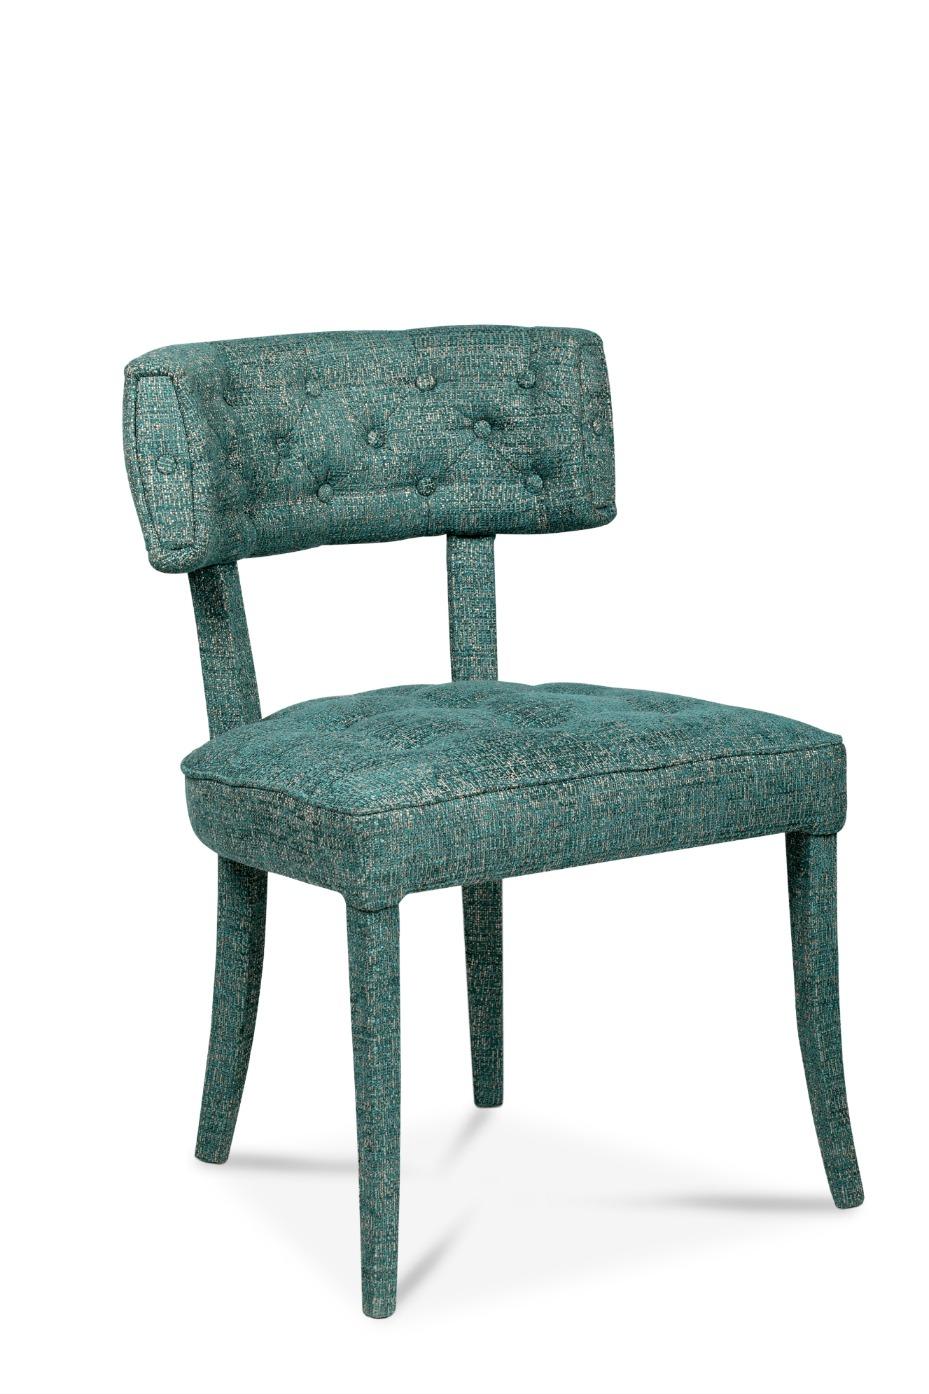 Modern Contemporary Zulu Fully Upholstered Legs Dining Chair in Brabbu 

Modern Contemporary Zulu Fully Upholstered Legs Dining Chair is a cotton velvet upholstered dining chair, with button tufted, making it an unforgettable chair design to any